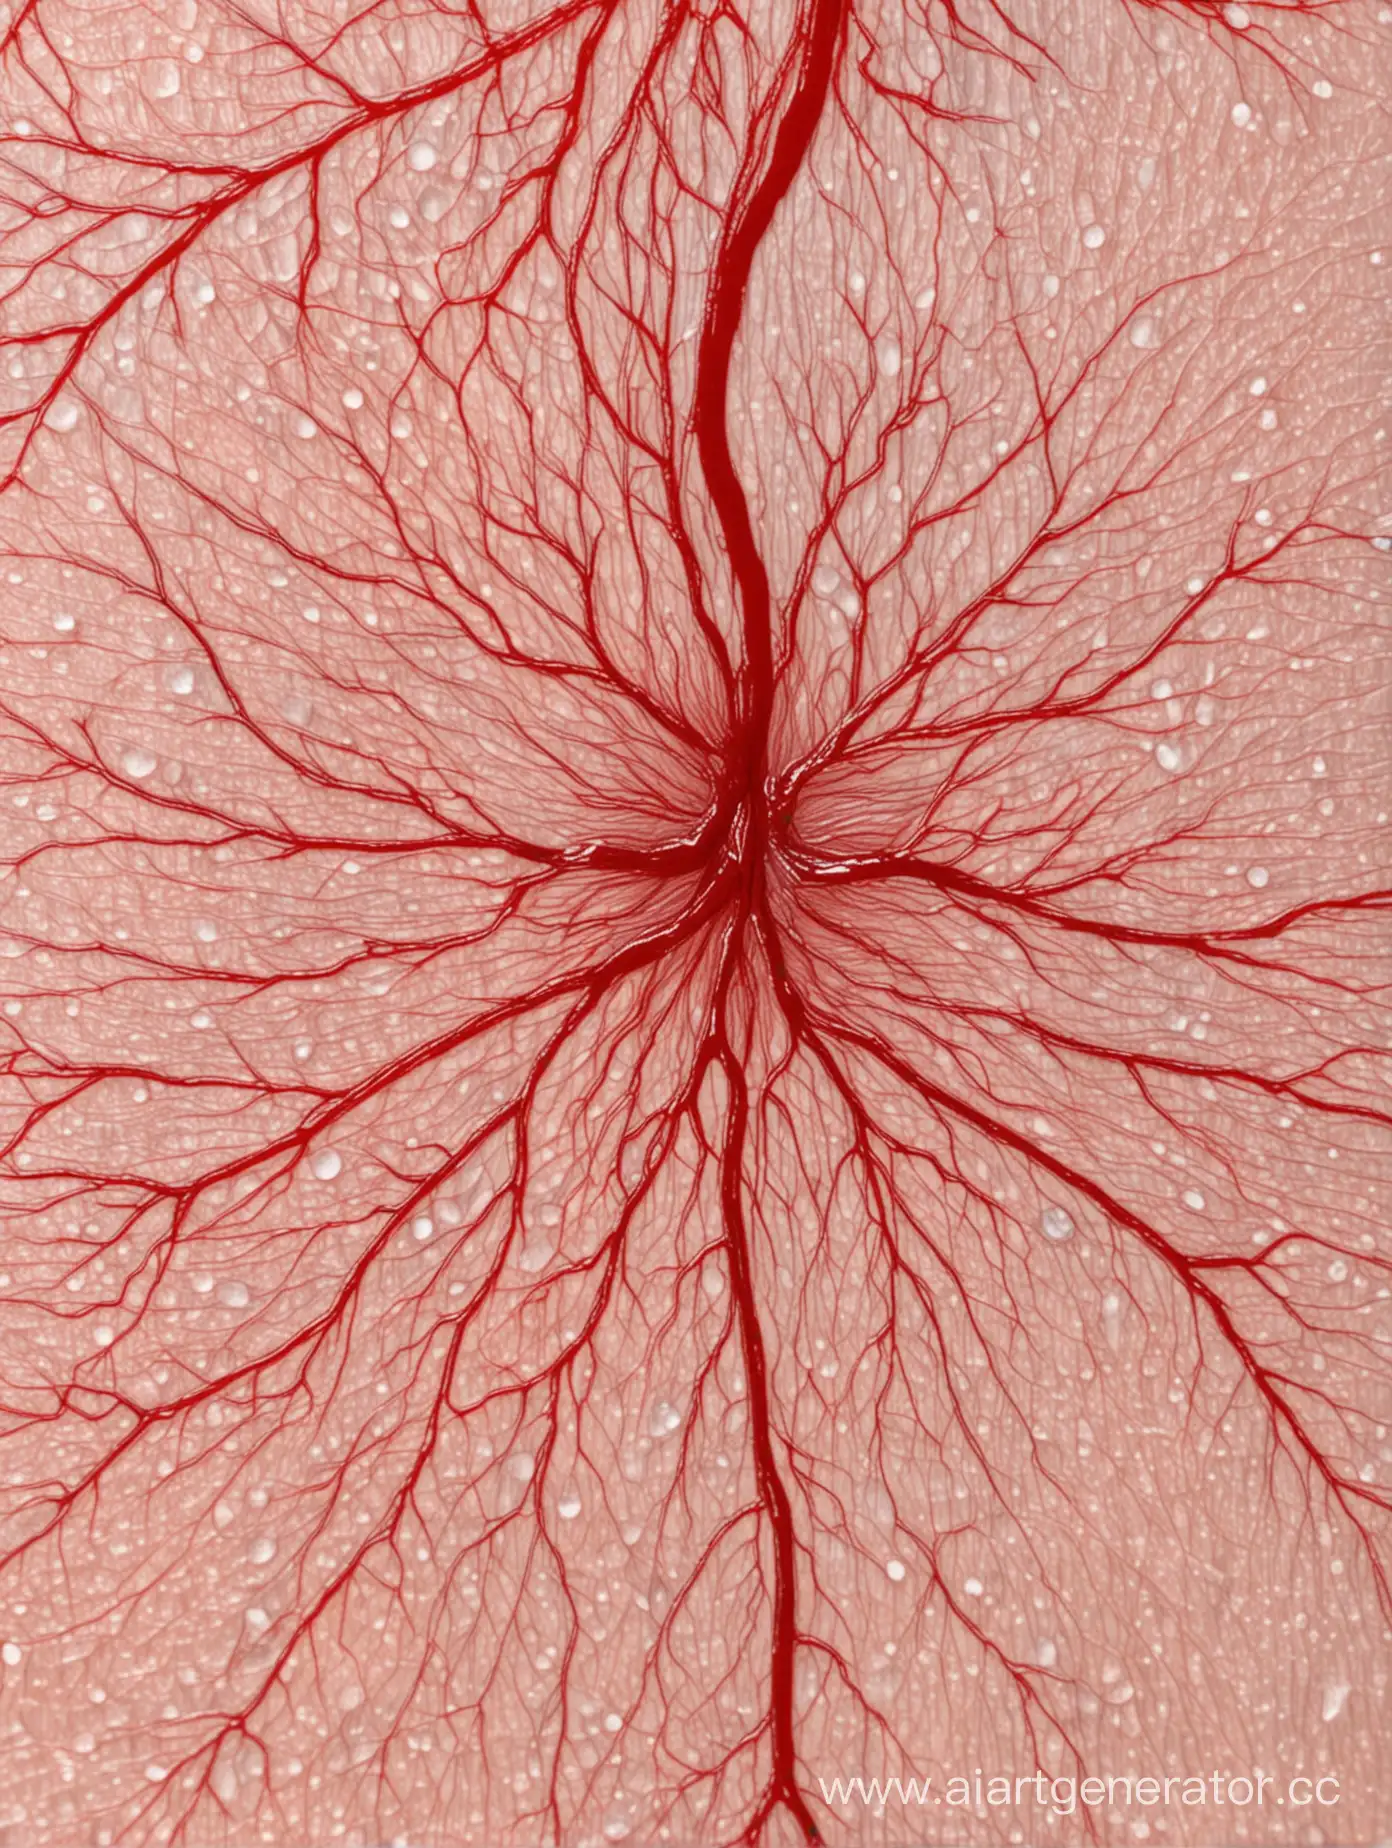 Internal-View-of-Capillary-Network-in-Skin